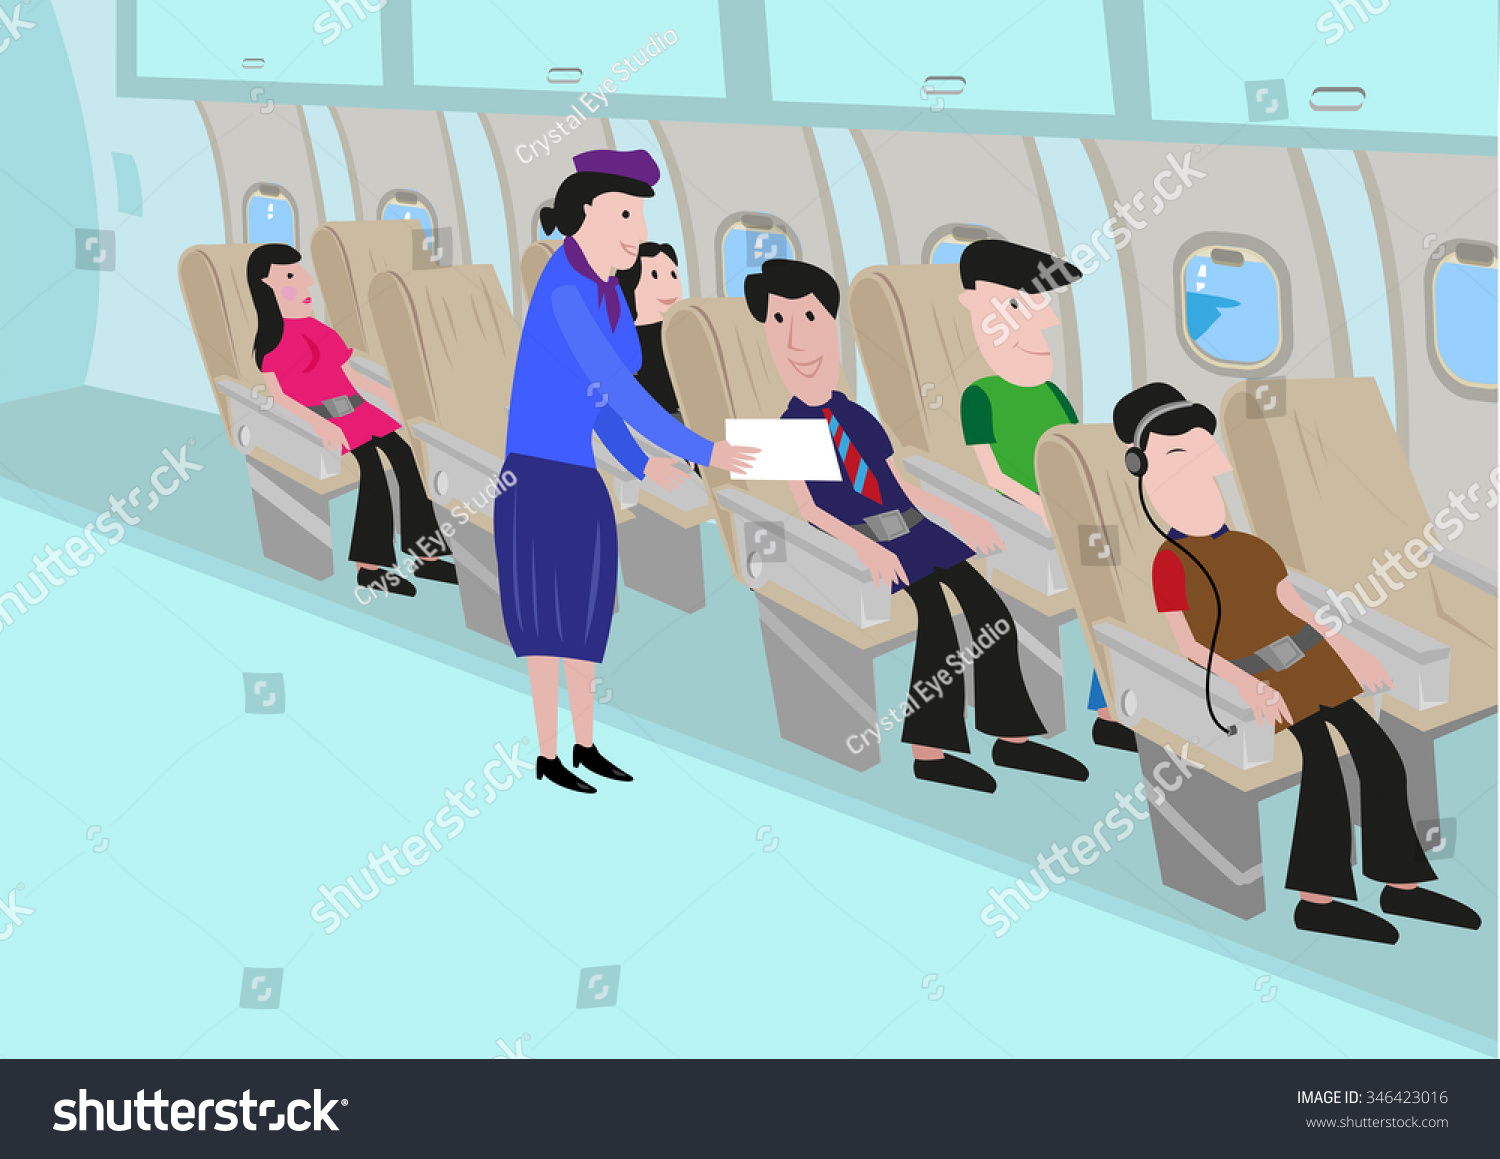 airplane seat clipart - photo #43